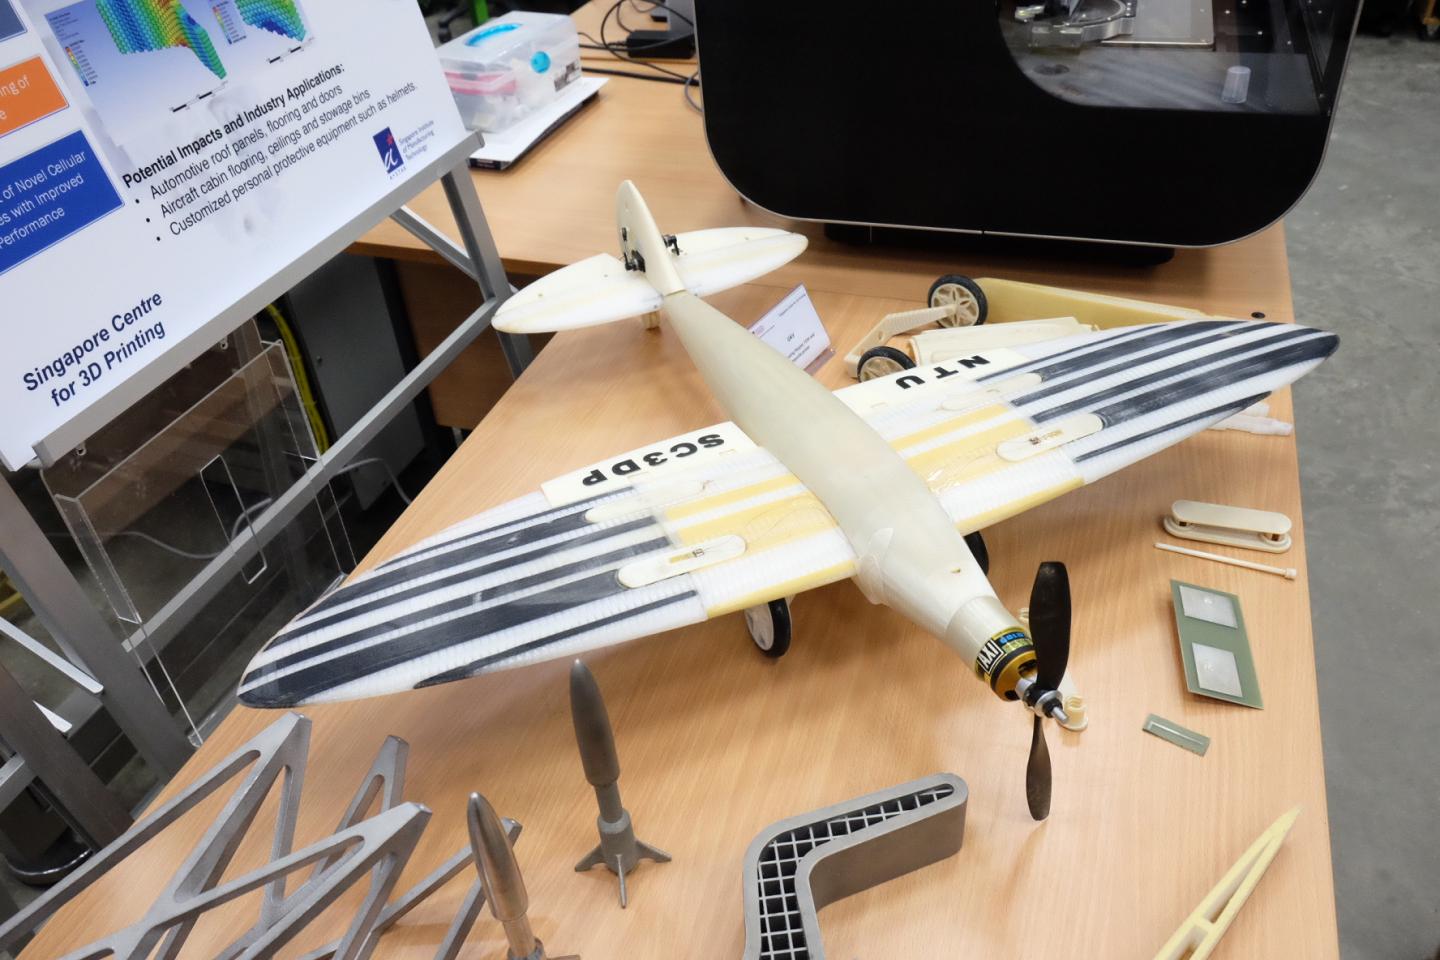 A Small UAV Developed by NTU and ST Engineering Using 3-D Printing Technologies